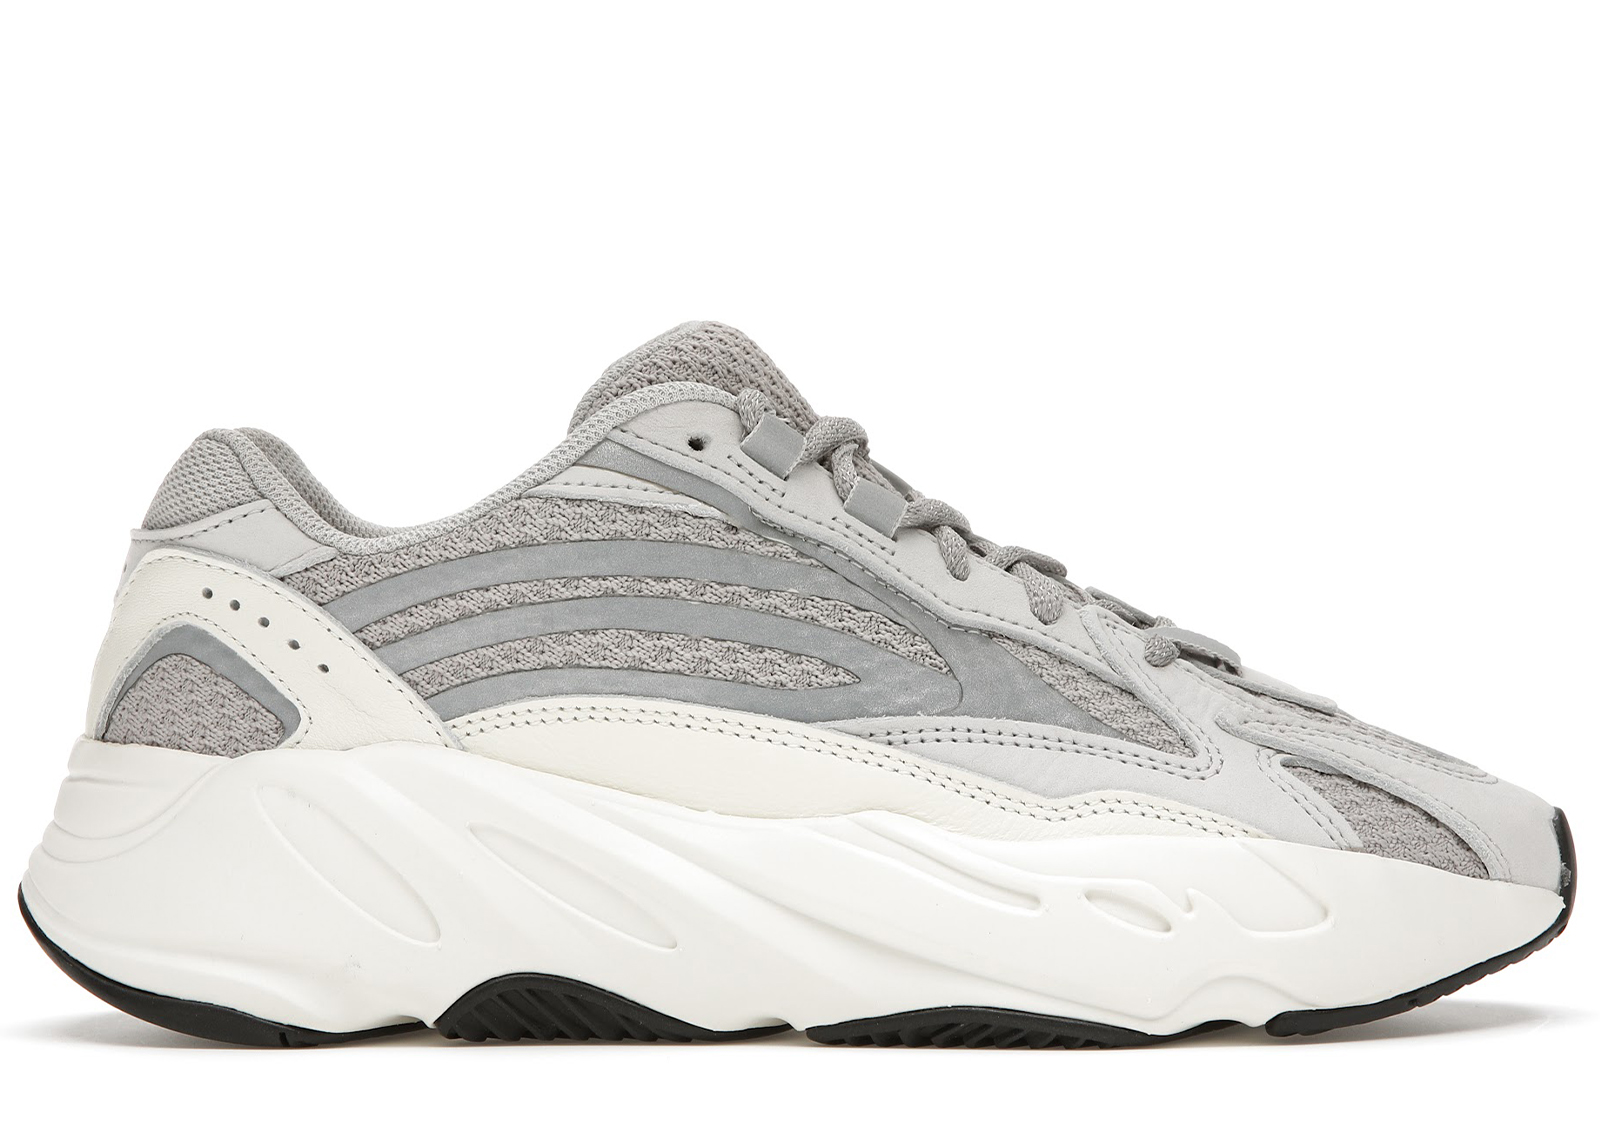 Buy adidas Yeezy 700 v2 Shoes & New Sneakers - StockX